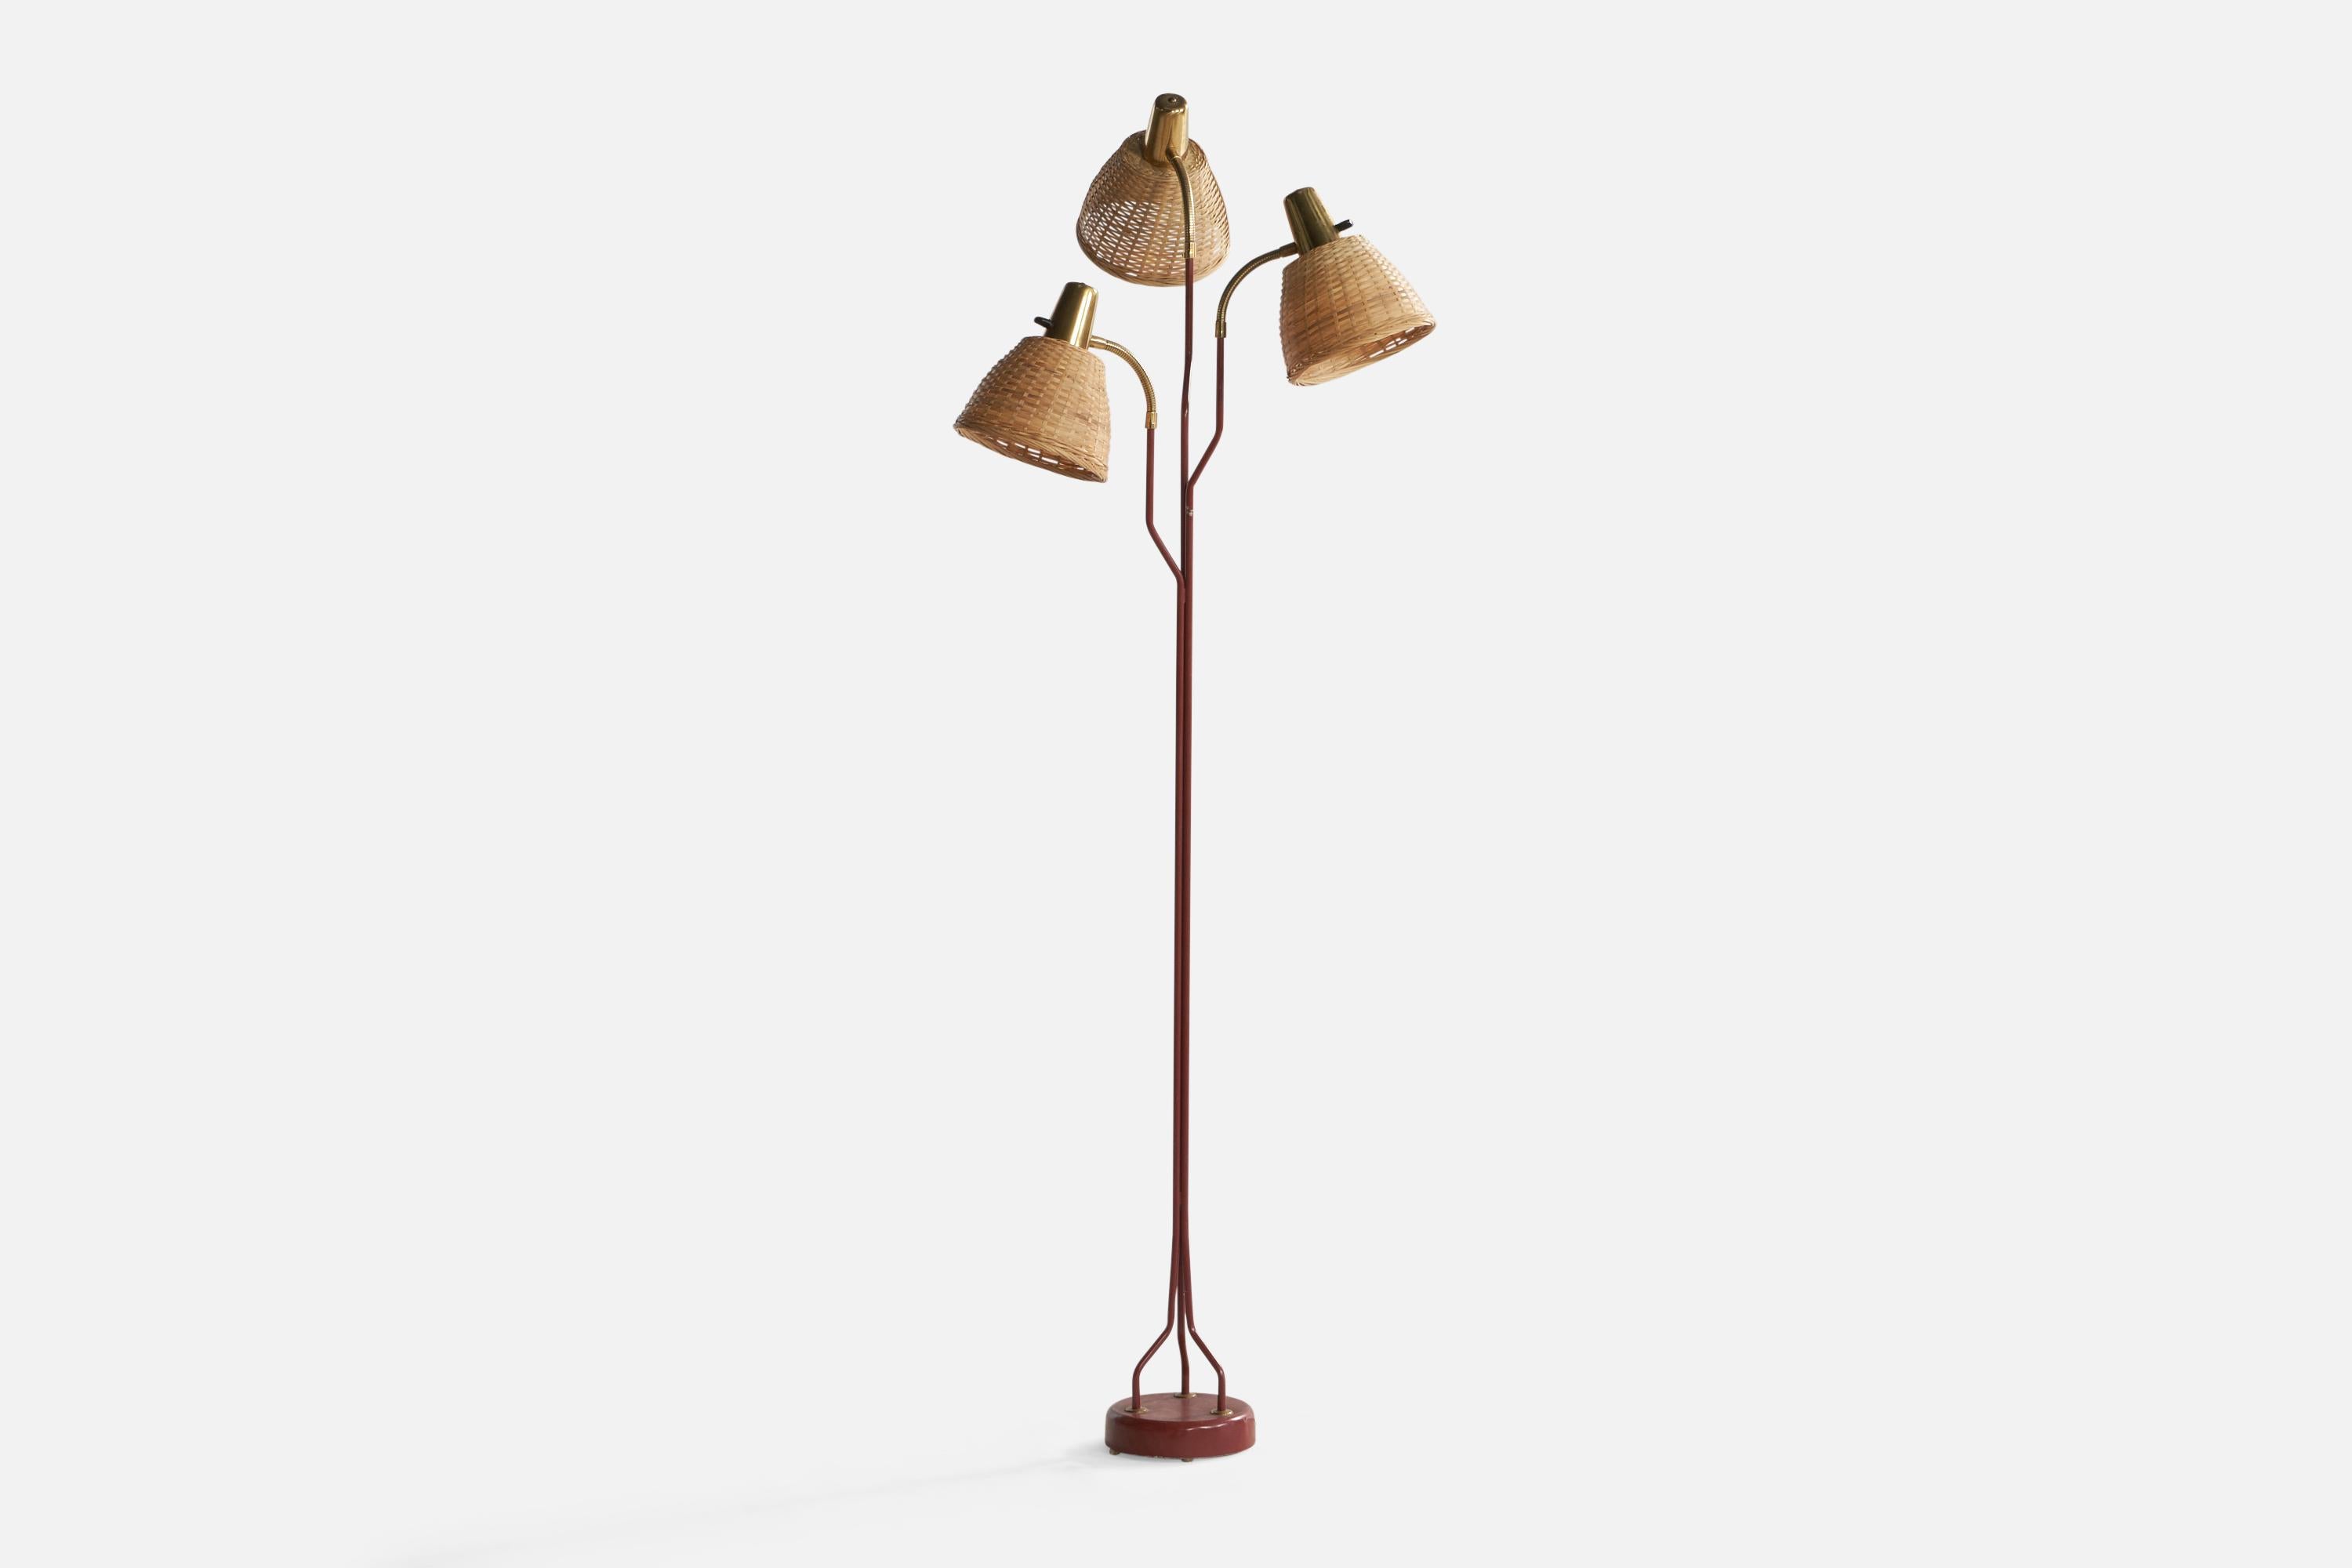 An adjustable three-armed brass, red-lacquered metal and rattan floor lamp, designed and produced by Eskilstuna Elektrofabrik Aktiebolag, Sweden, c. 1960s.

Overall Dimensions (inches): 61.75” H x 21” W x 19” D. Stated dimensions include